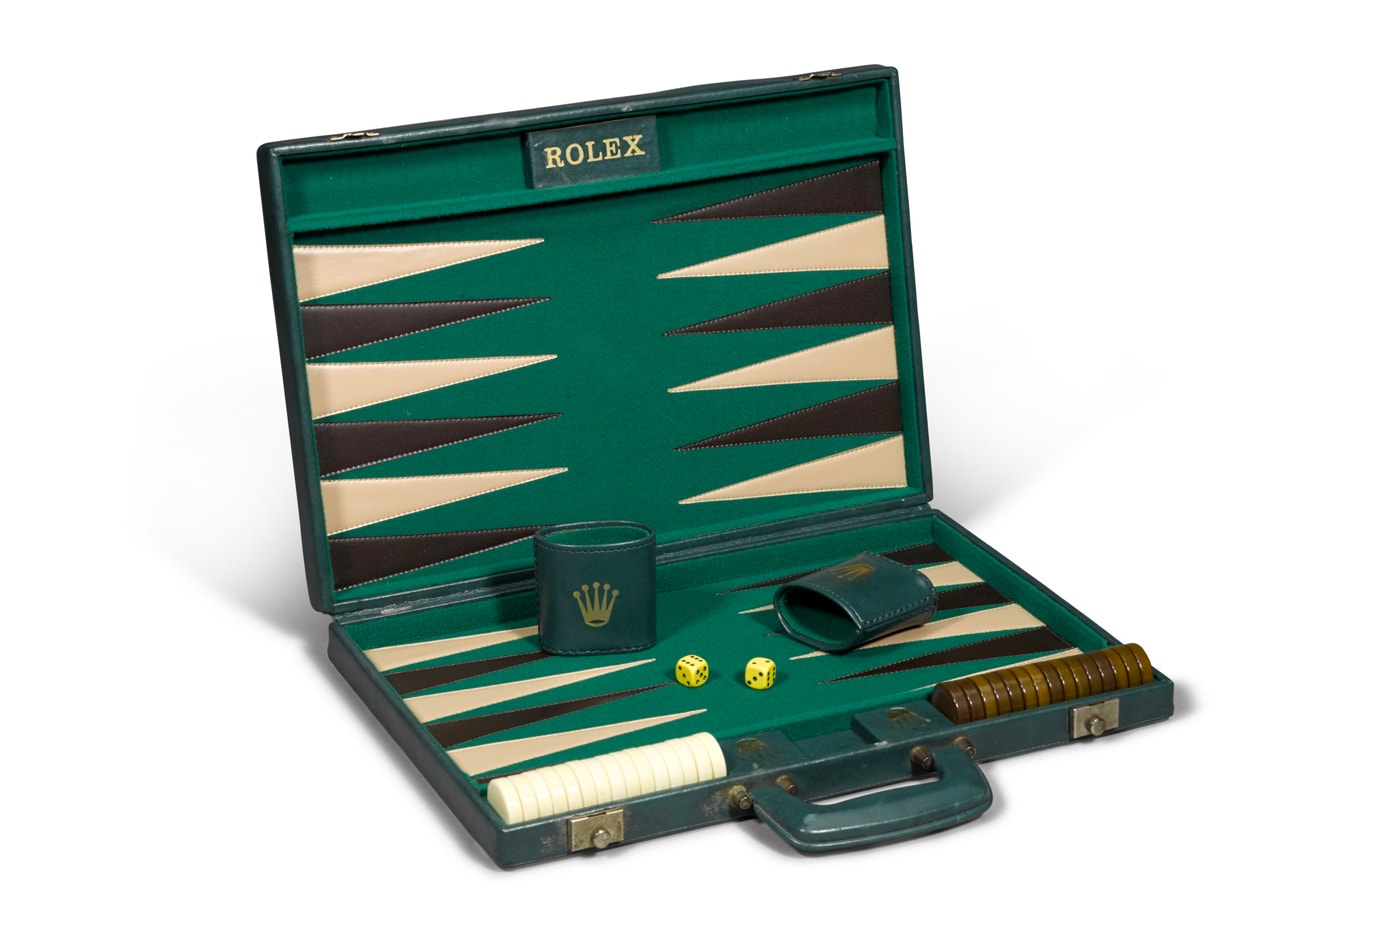 Sotheby's Rolex 1960 leather backgammon set auction sale Sotheby's watches accessories VIP antique collections auctions 